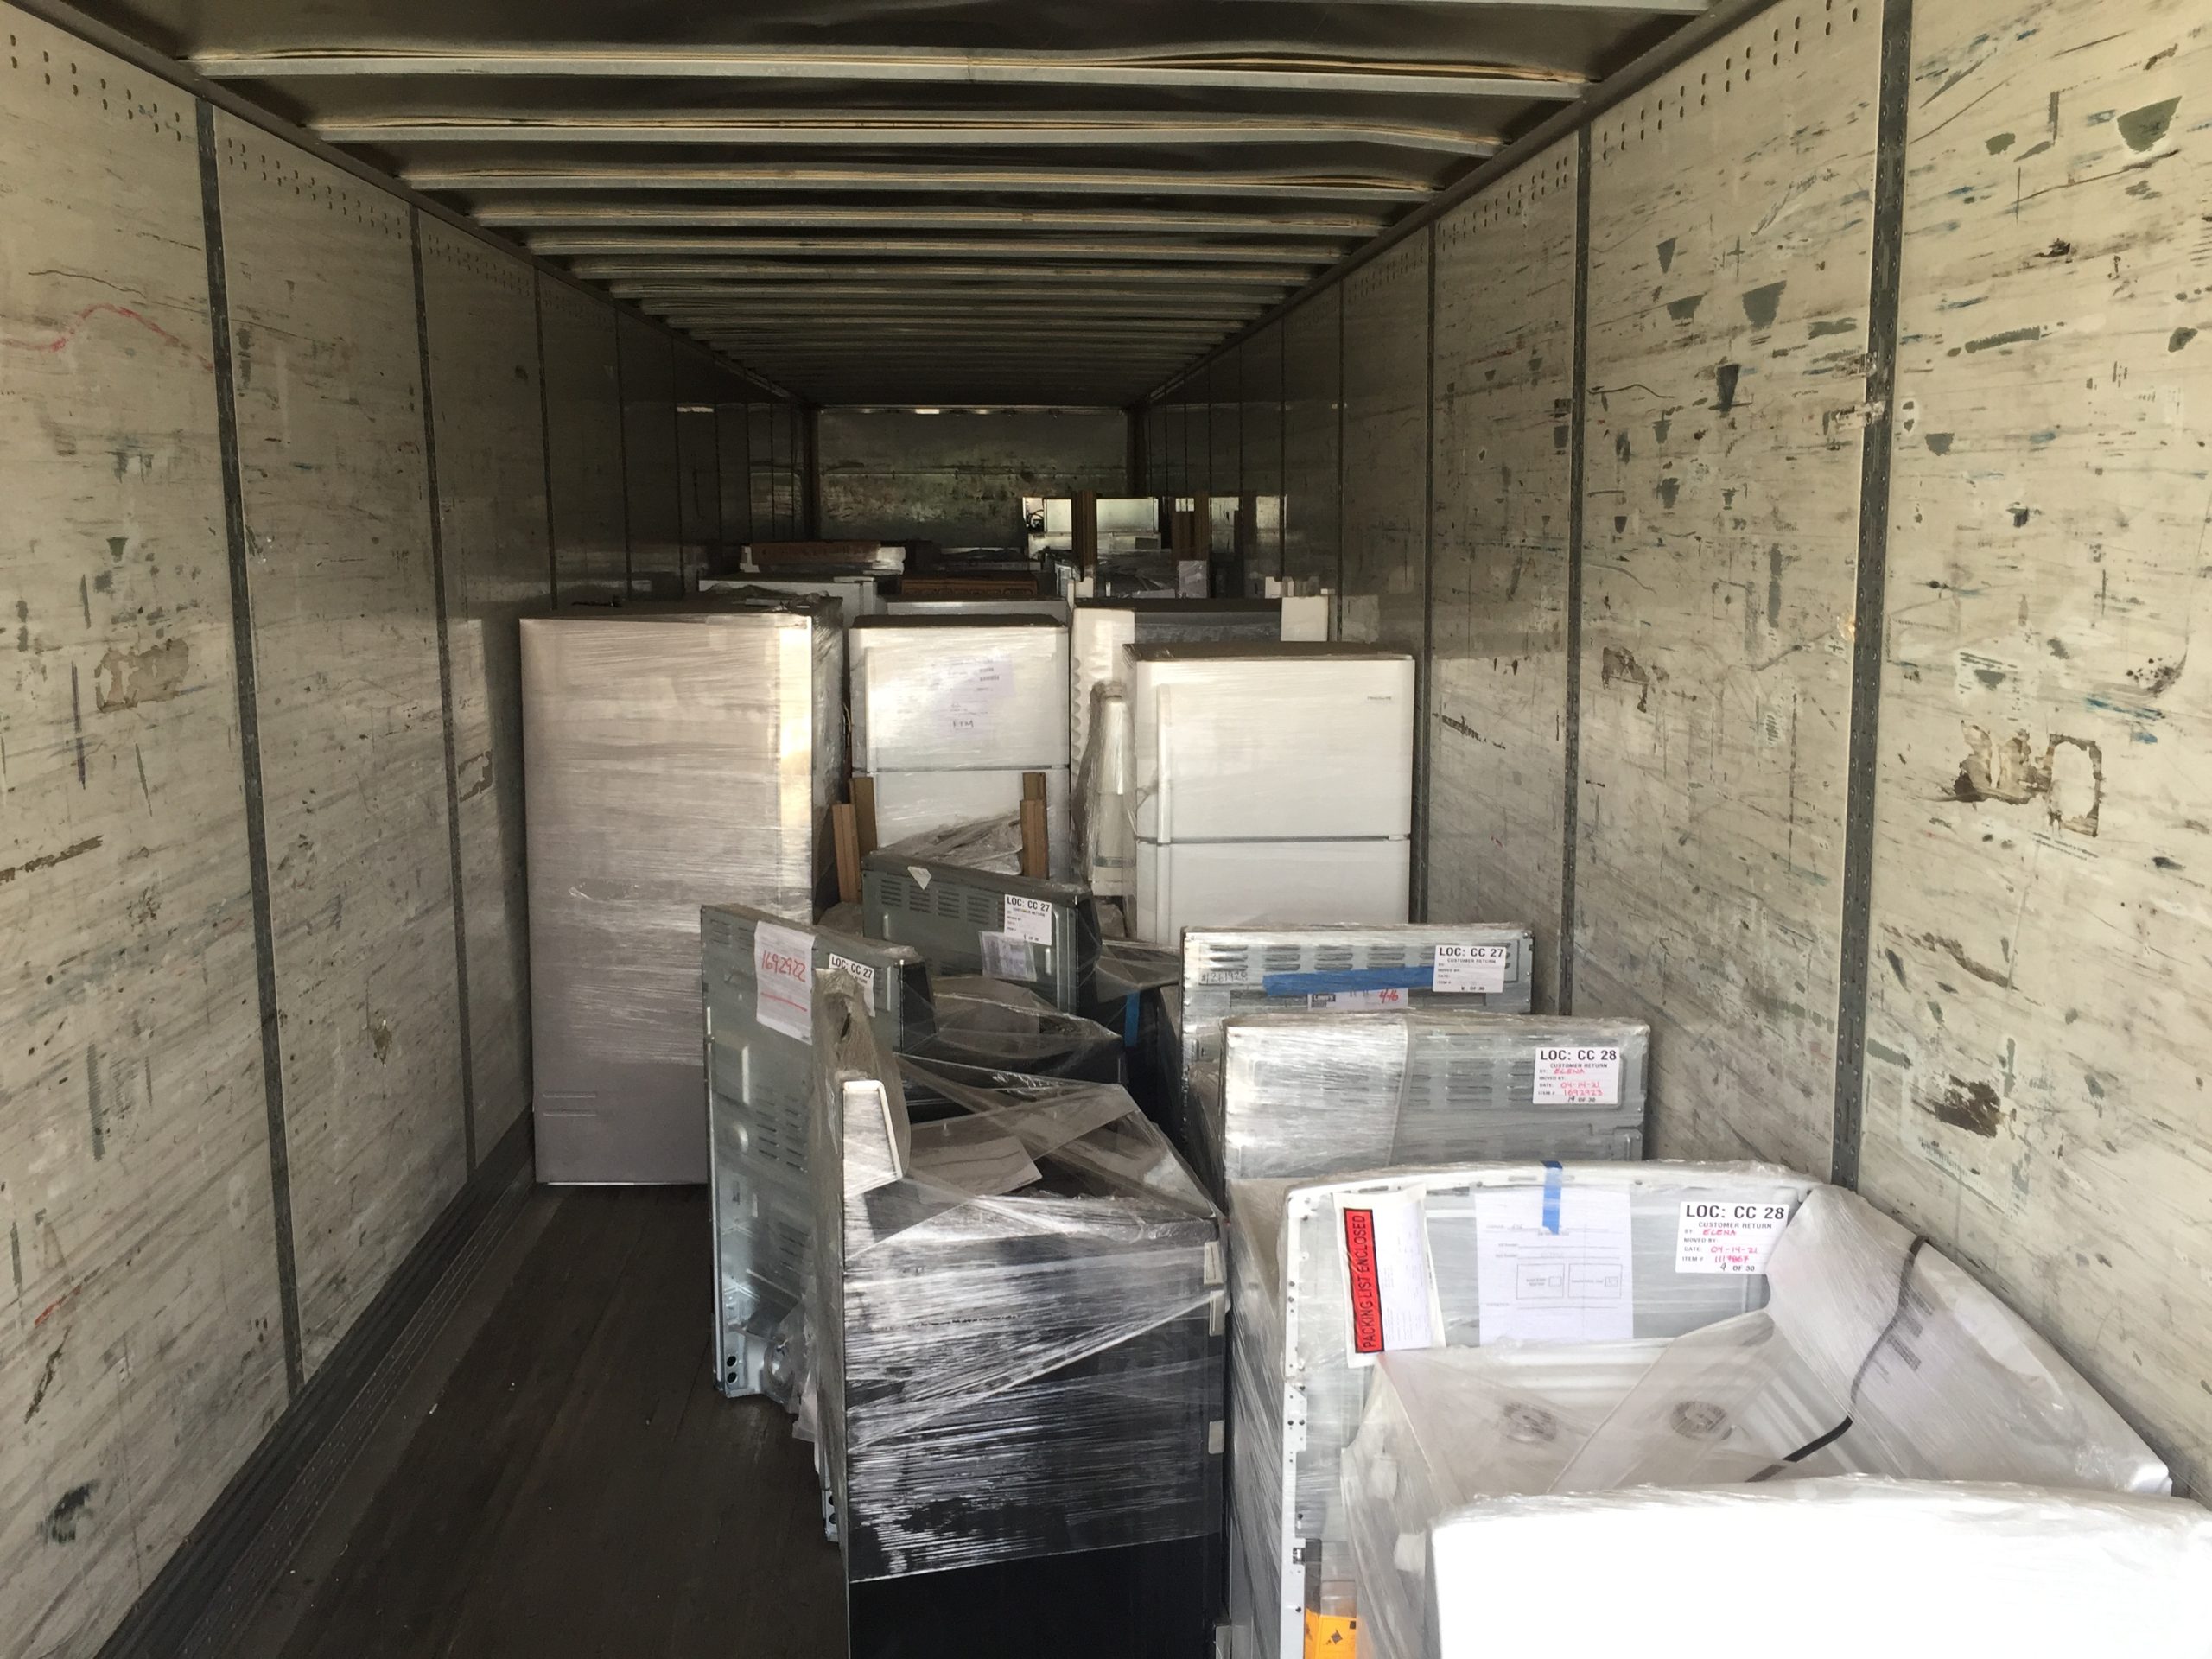 example photos of Full Truckload of Scratch and Dent Appliances from Best Buy’s Scratch and Dent Liquidation Program.